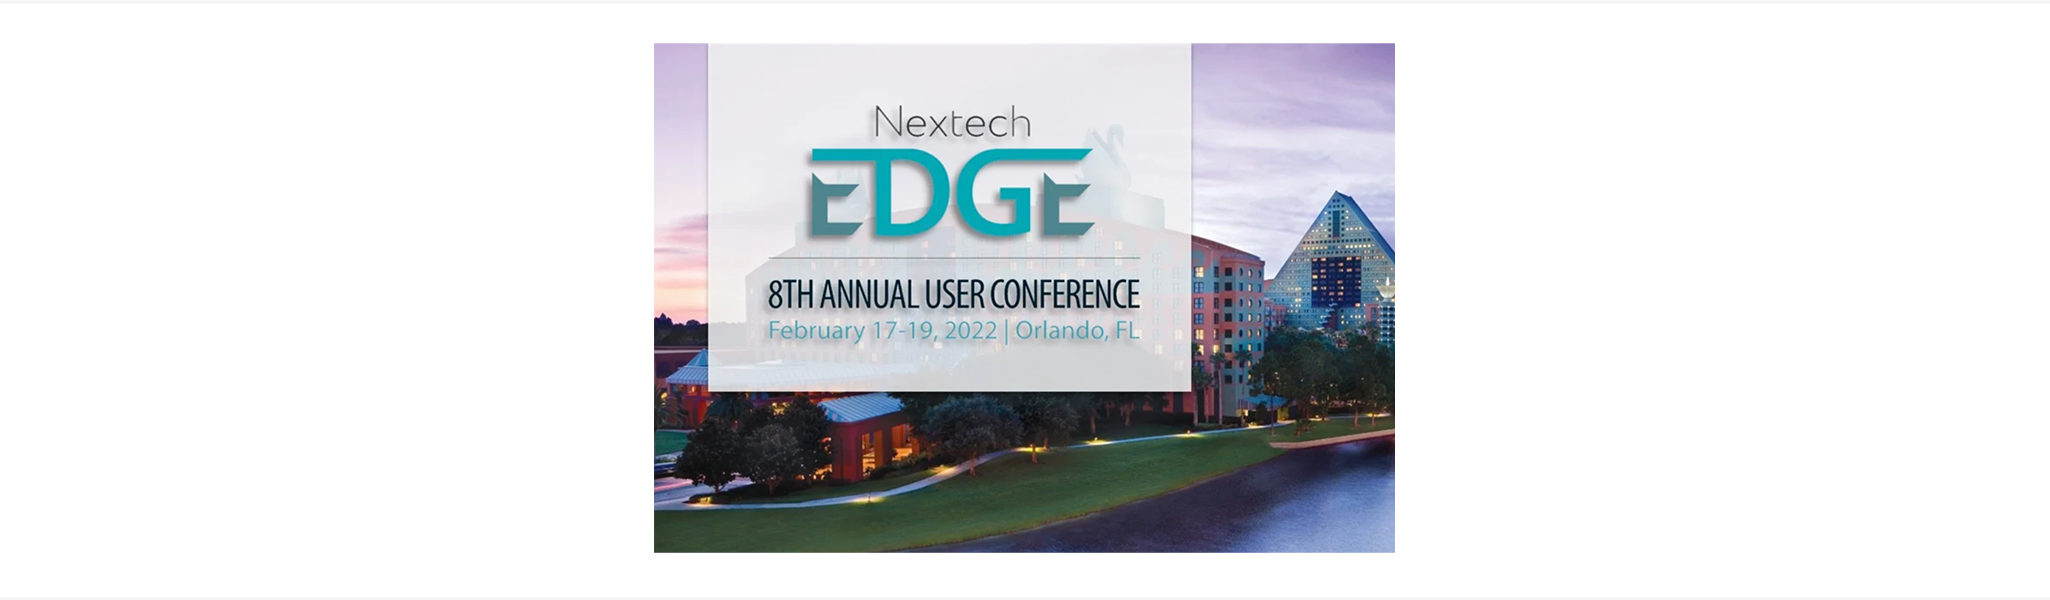 EDGE is Back! (And here’s why you should go)